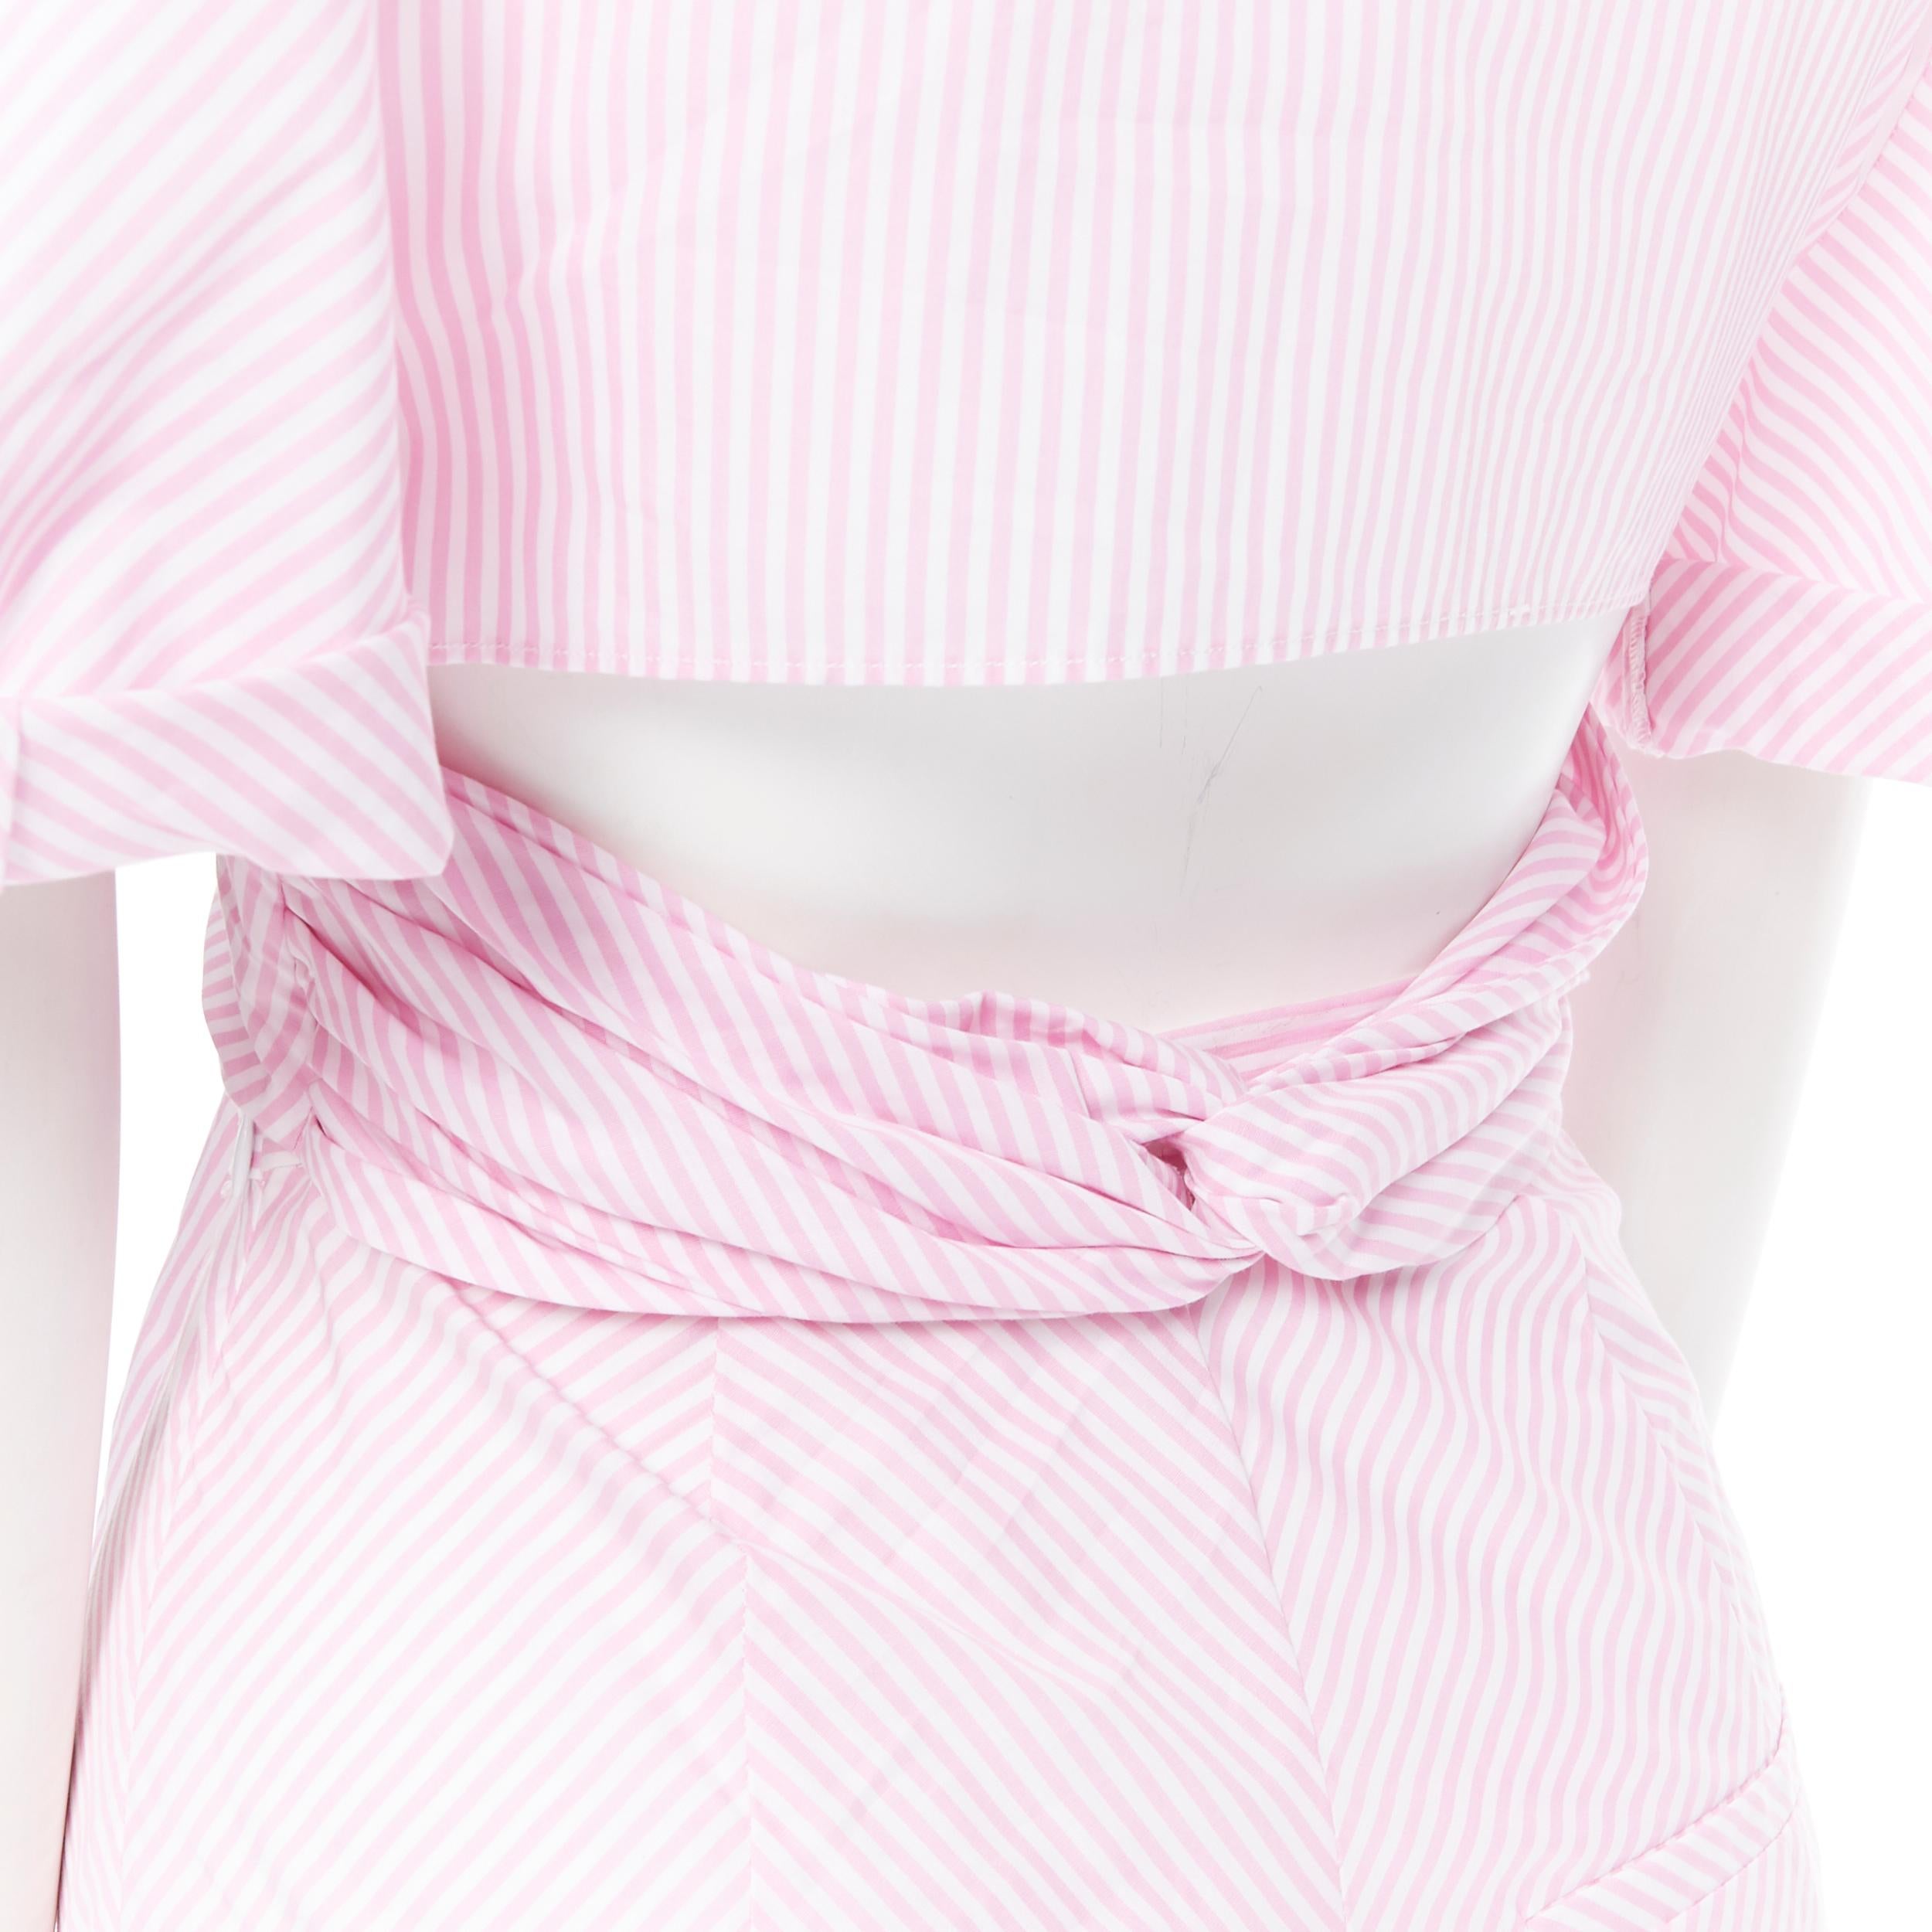 PETERSYN Belle pink white striped cotton tie front wide leg jumpsuit XS
Brand: Petersyn
Model Name / Style: Jumpsuit
Material: Cotton
Color: Pink
Pattern: Striped
Closure: Zip
Extra Detail: Self tie waist. Zip closure on trousers. Boxy fit top.